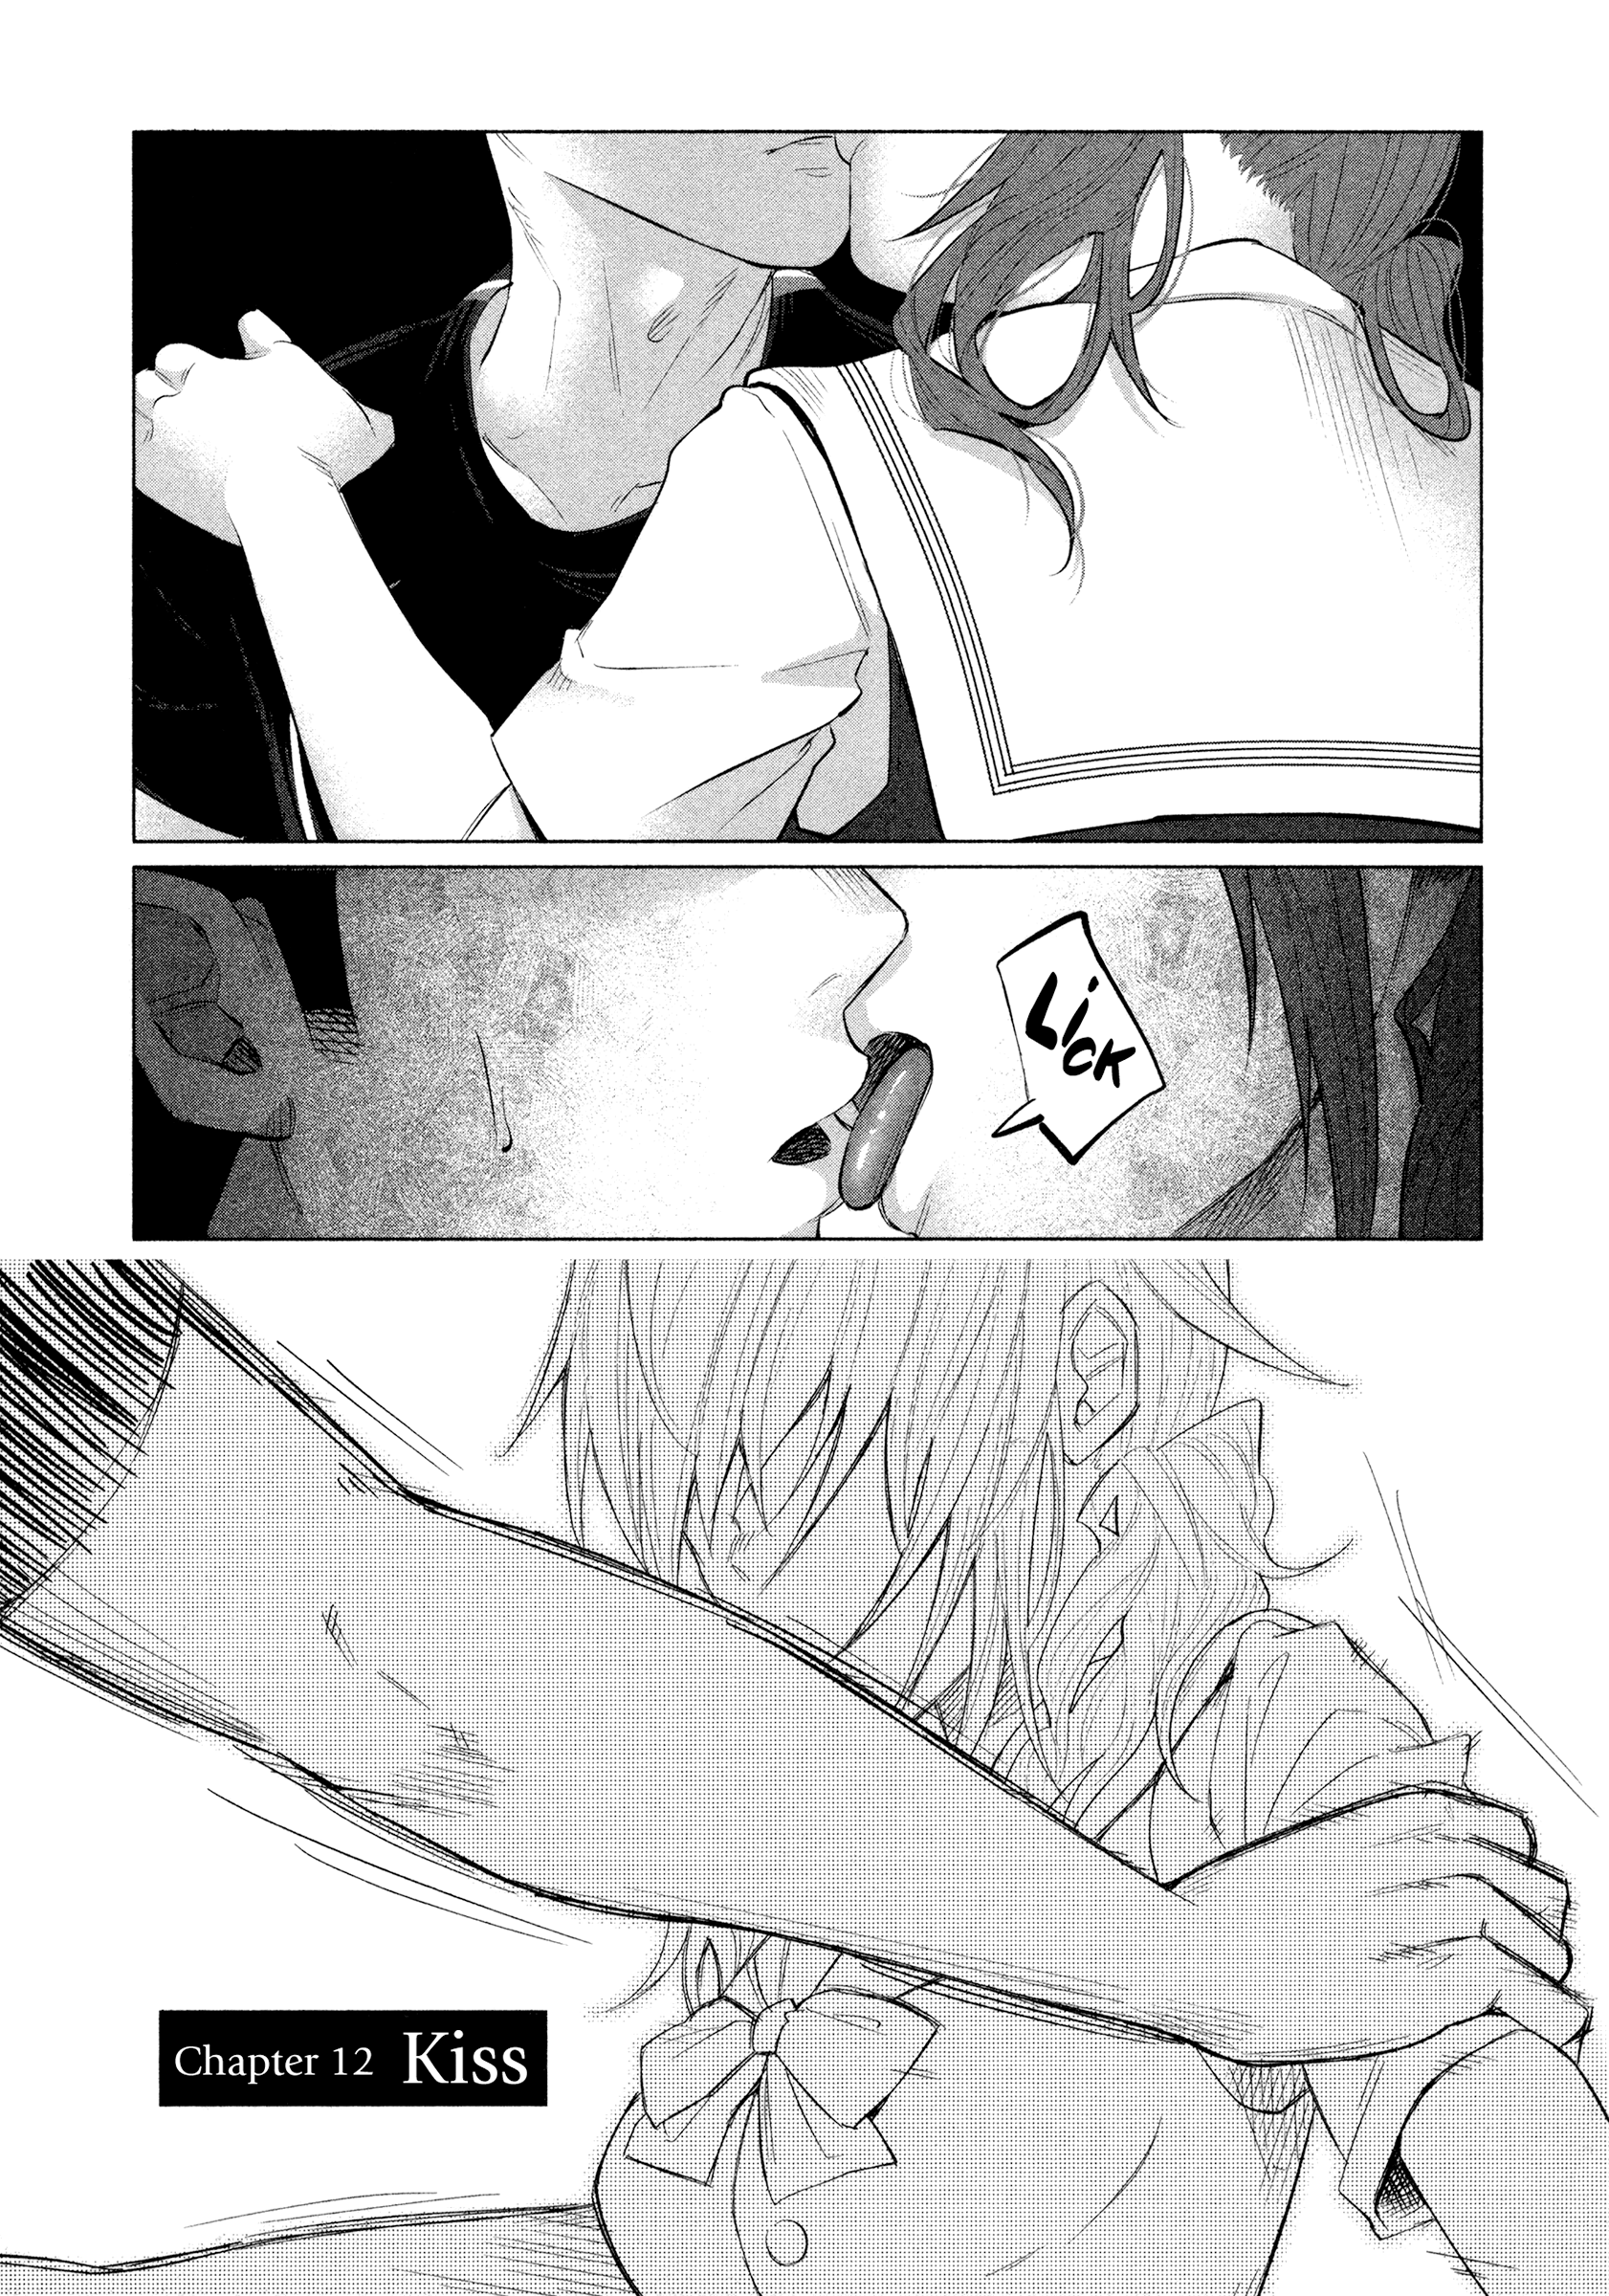 I Wanted To Be Hurt By Love - Page 2